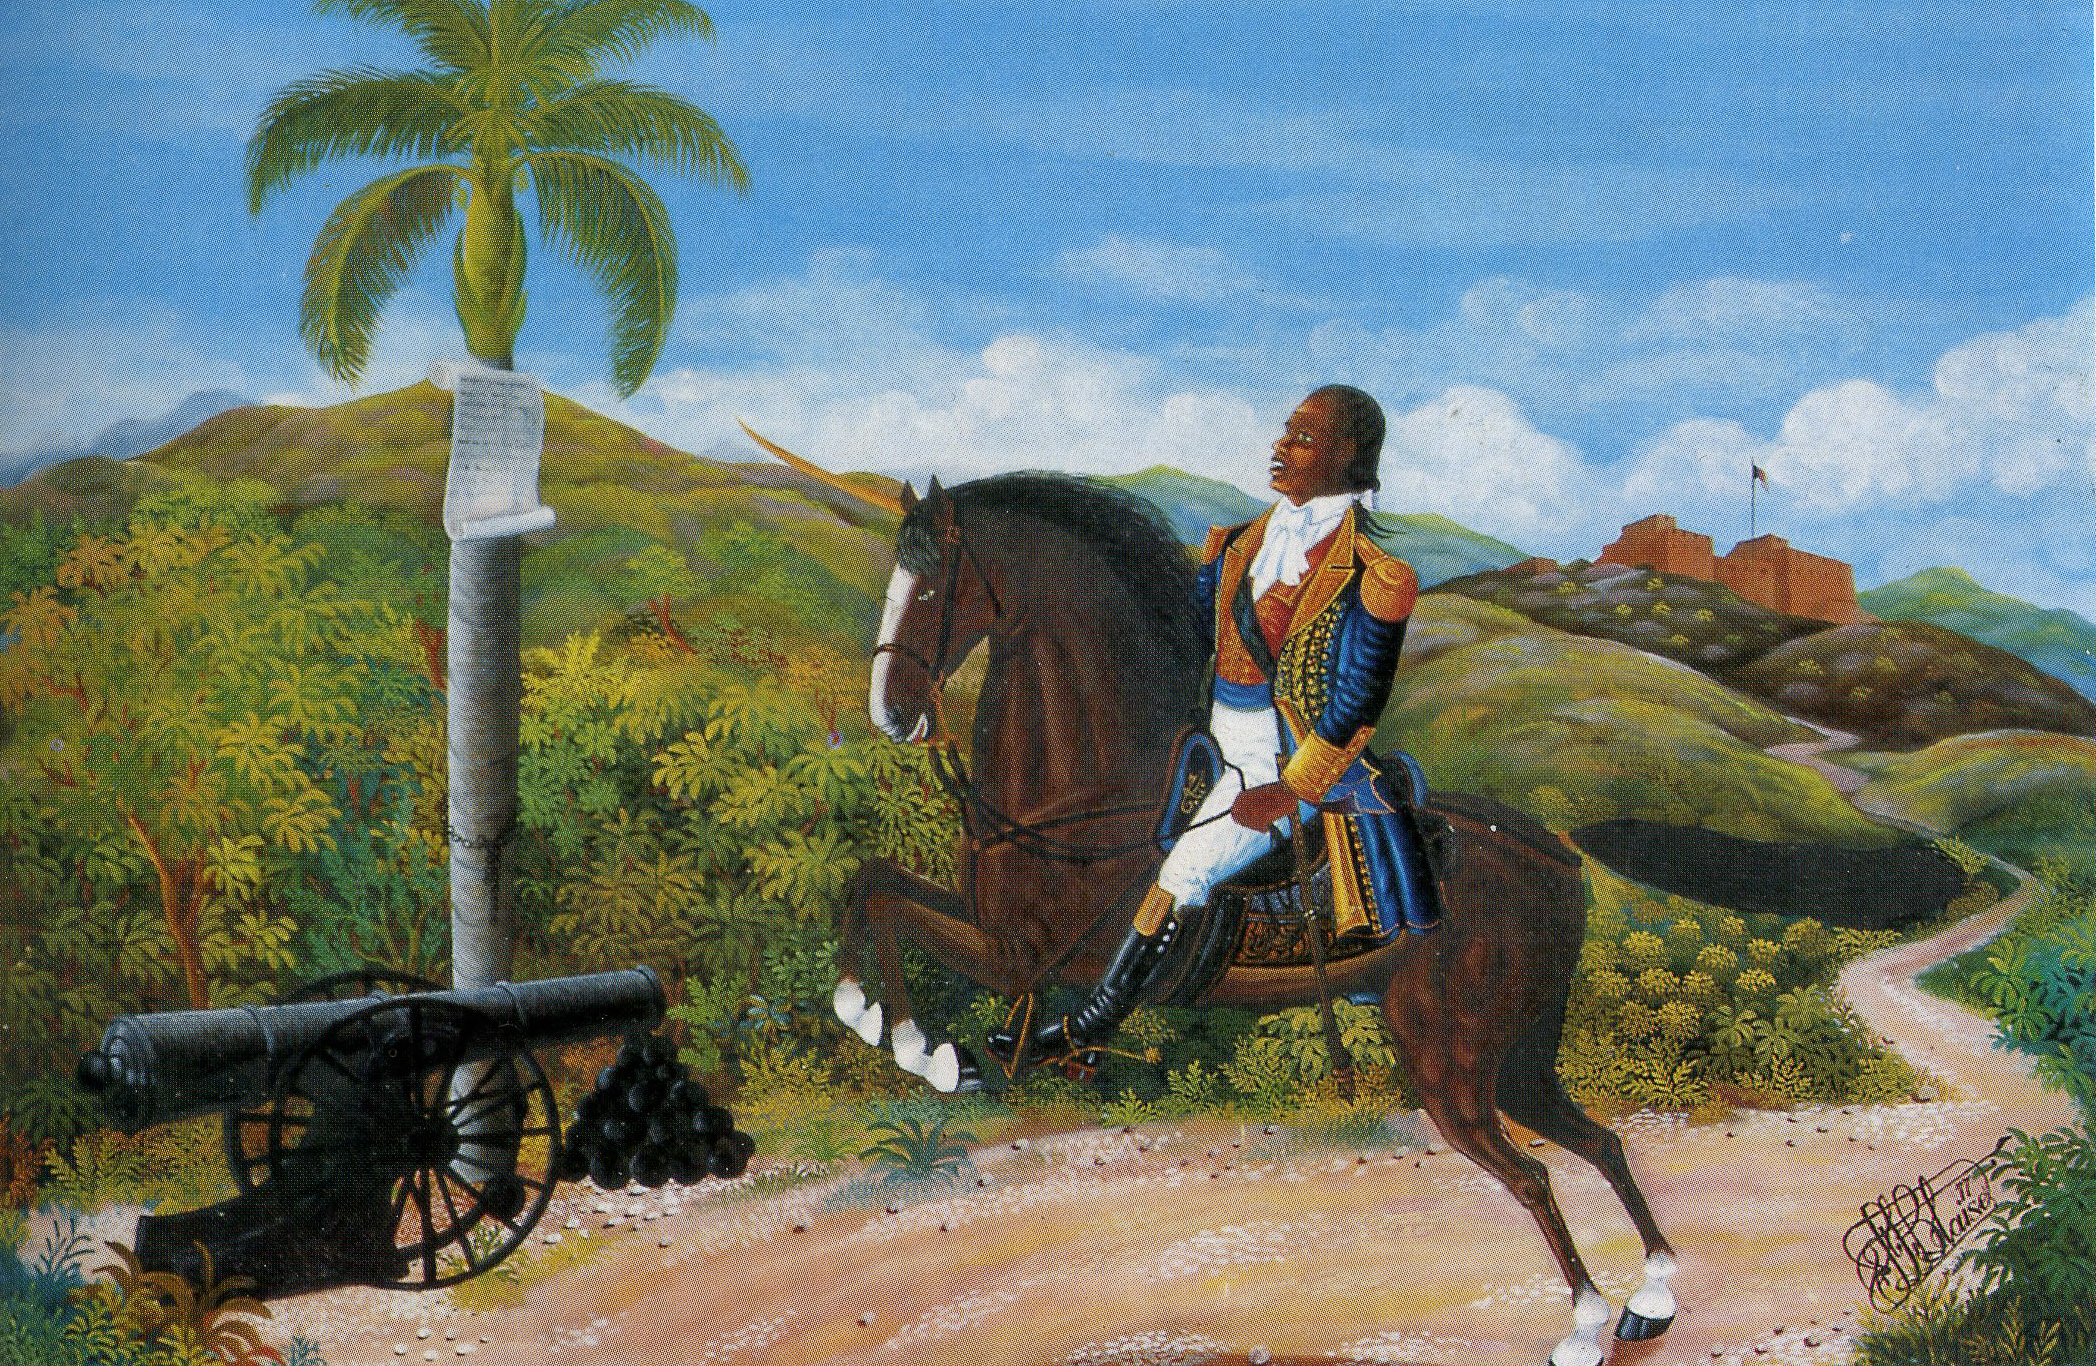 Toussaint Louverture and the palmetto of liberty, 1977